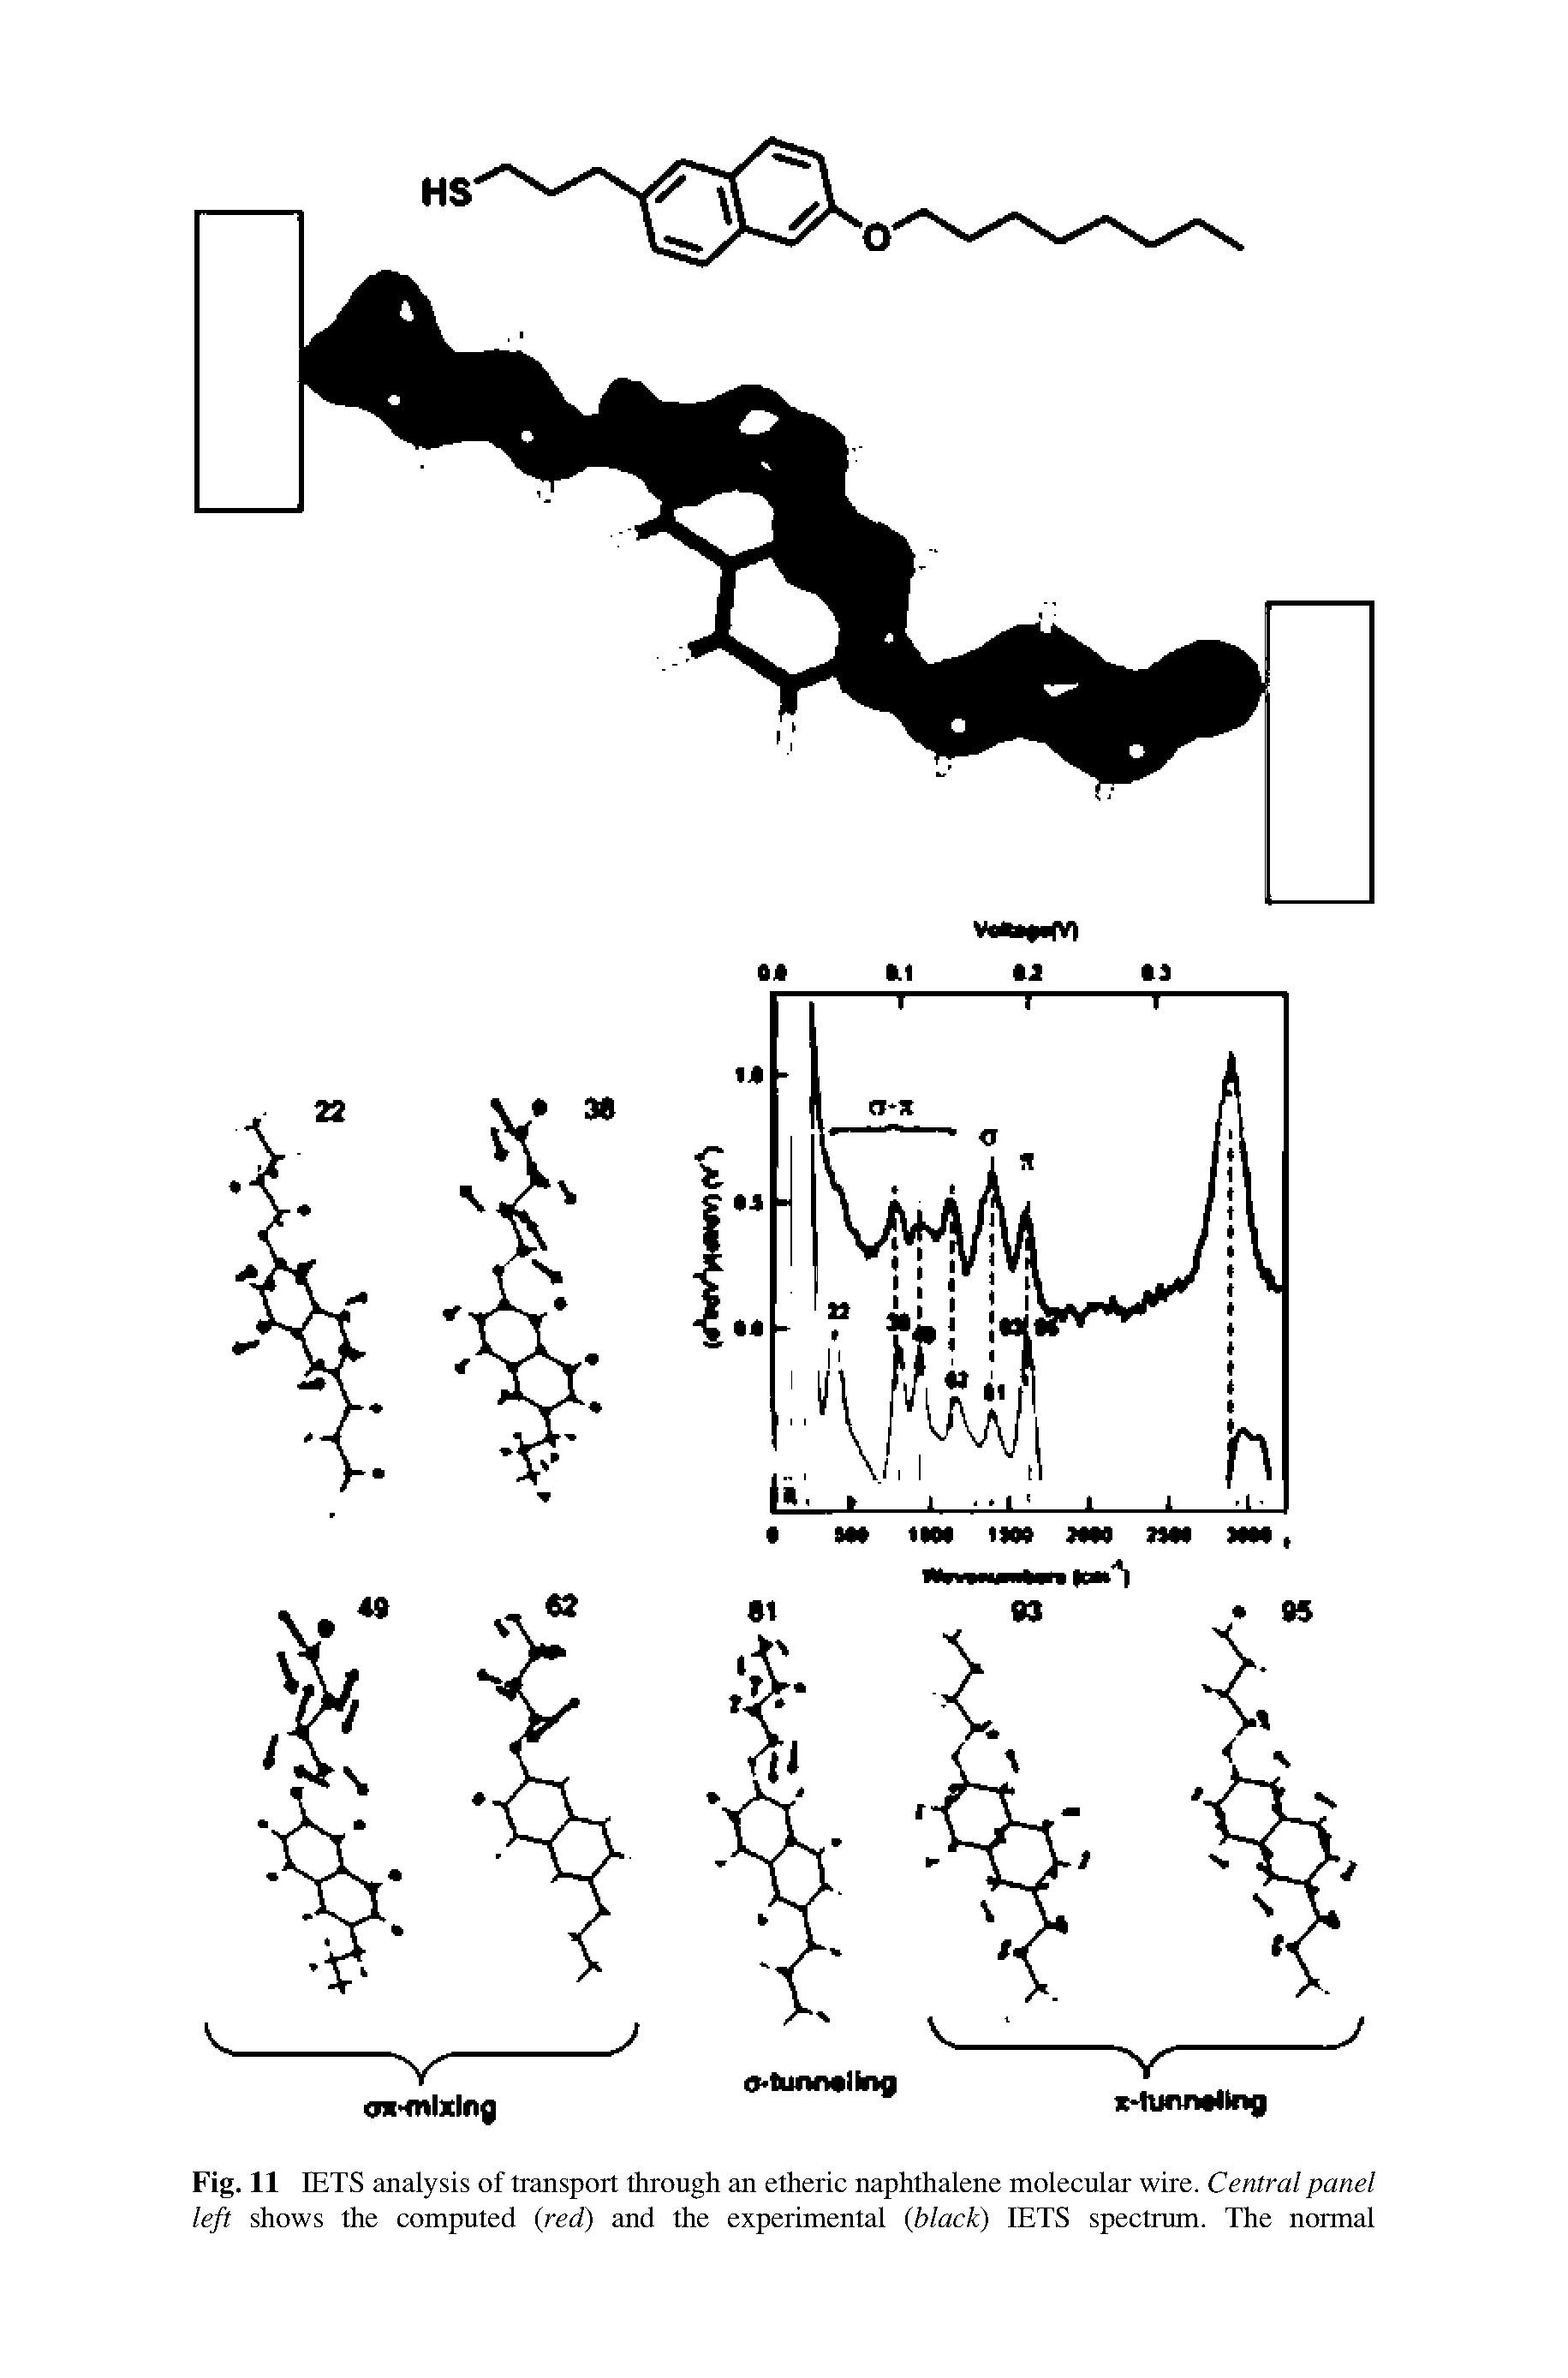 Fig. 11 IETS analysis of transport through an etheric naphthalene molecular wire. Central panel left shows the computed (red) and the experimental (black) IETS spectrum. The normal...